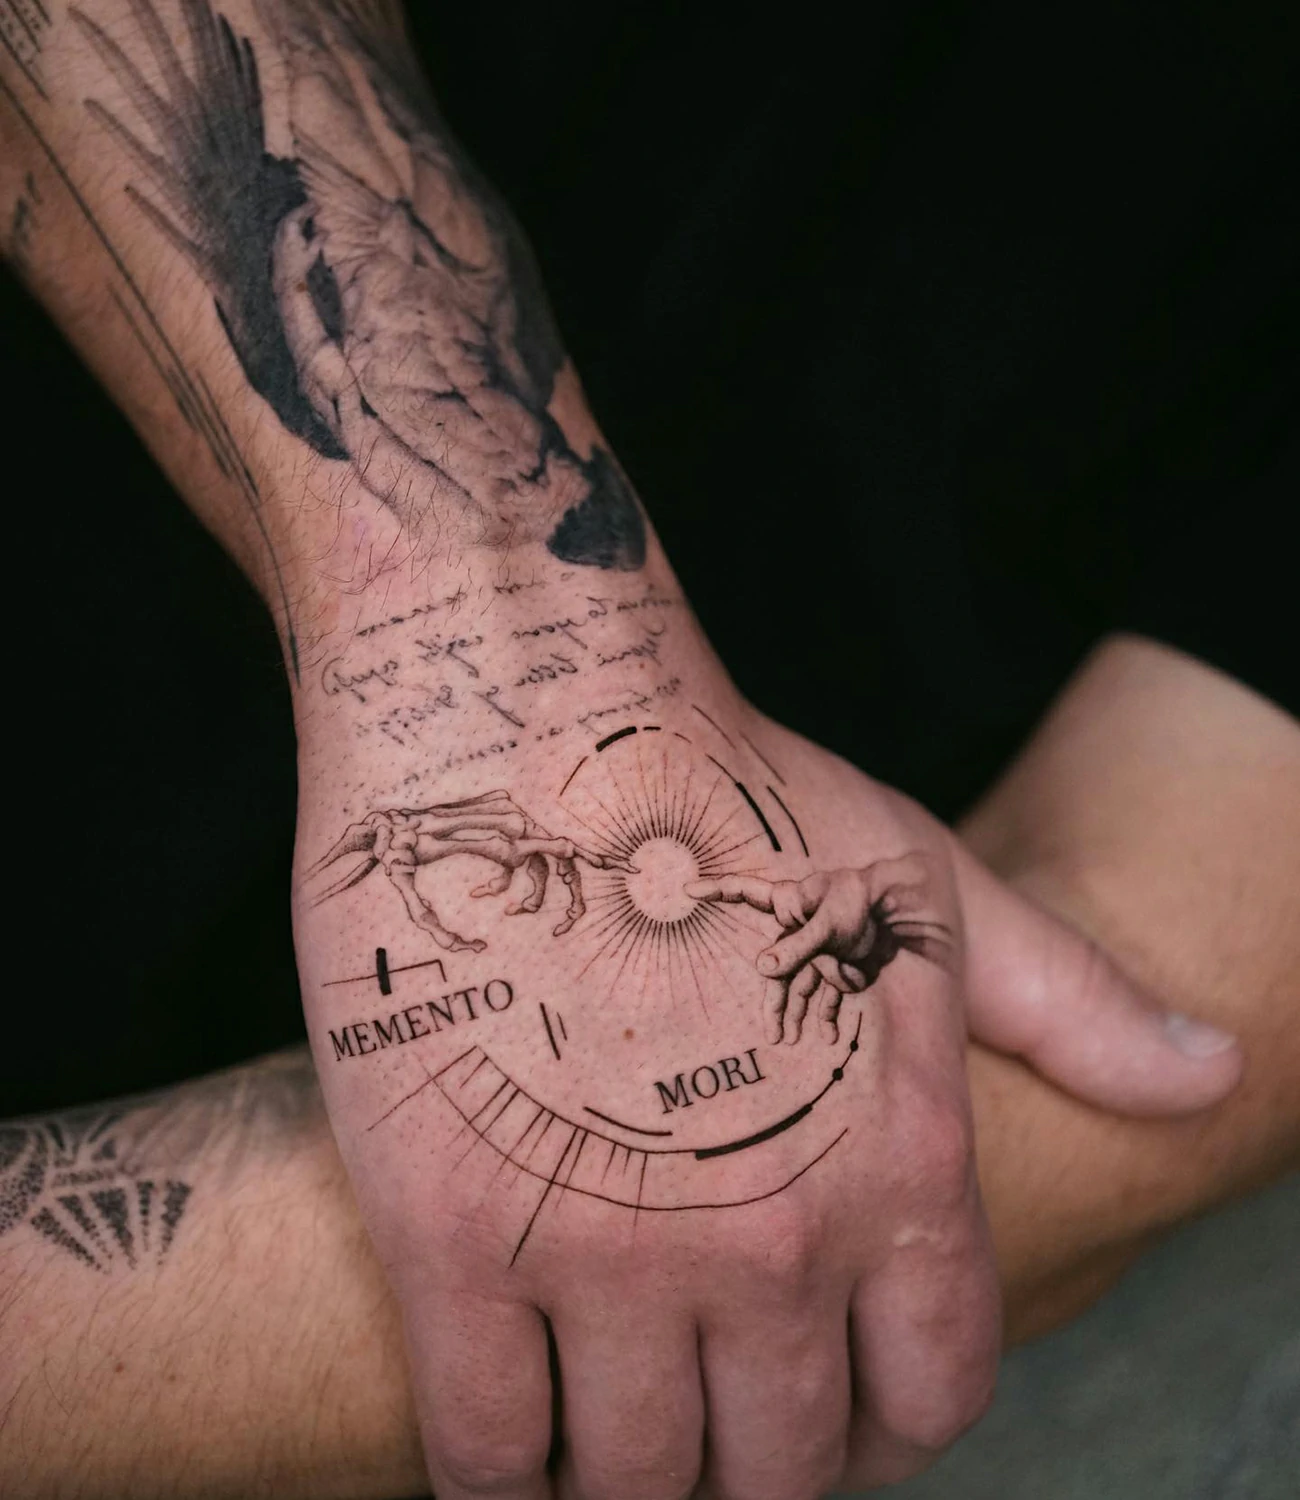 memento mori stoic tattoo: A tattoo reflecting Stoic philosophy, with "memento mori" and symbols or quotes from Stoicism.